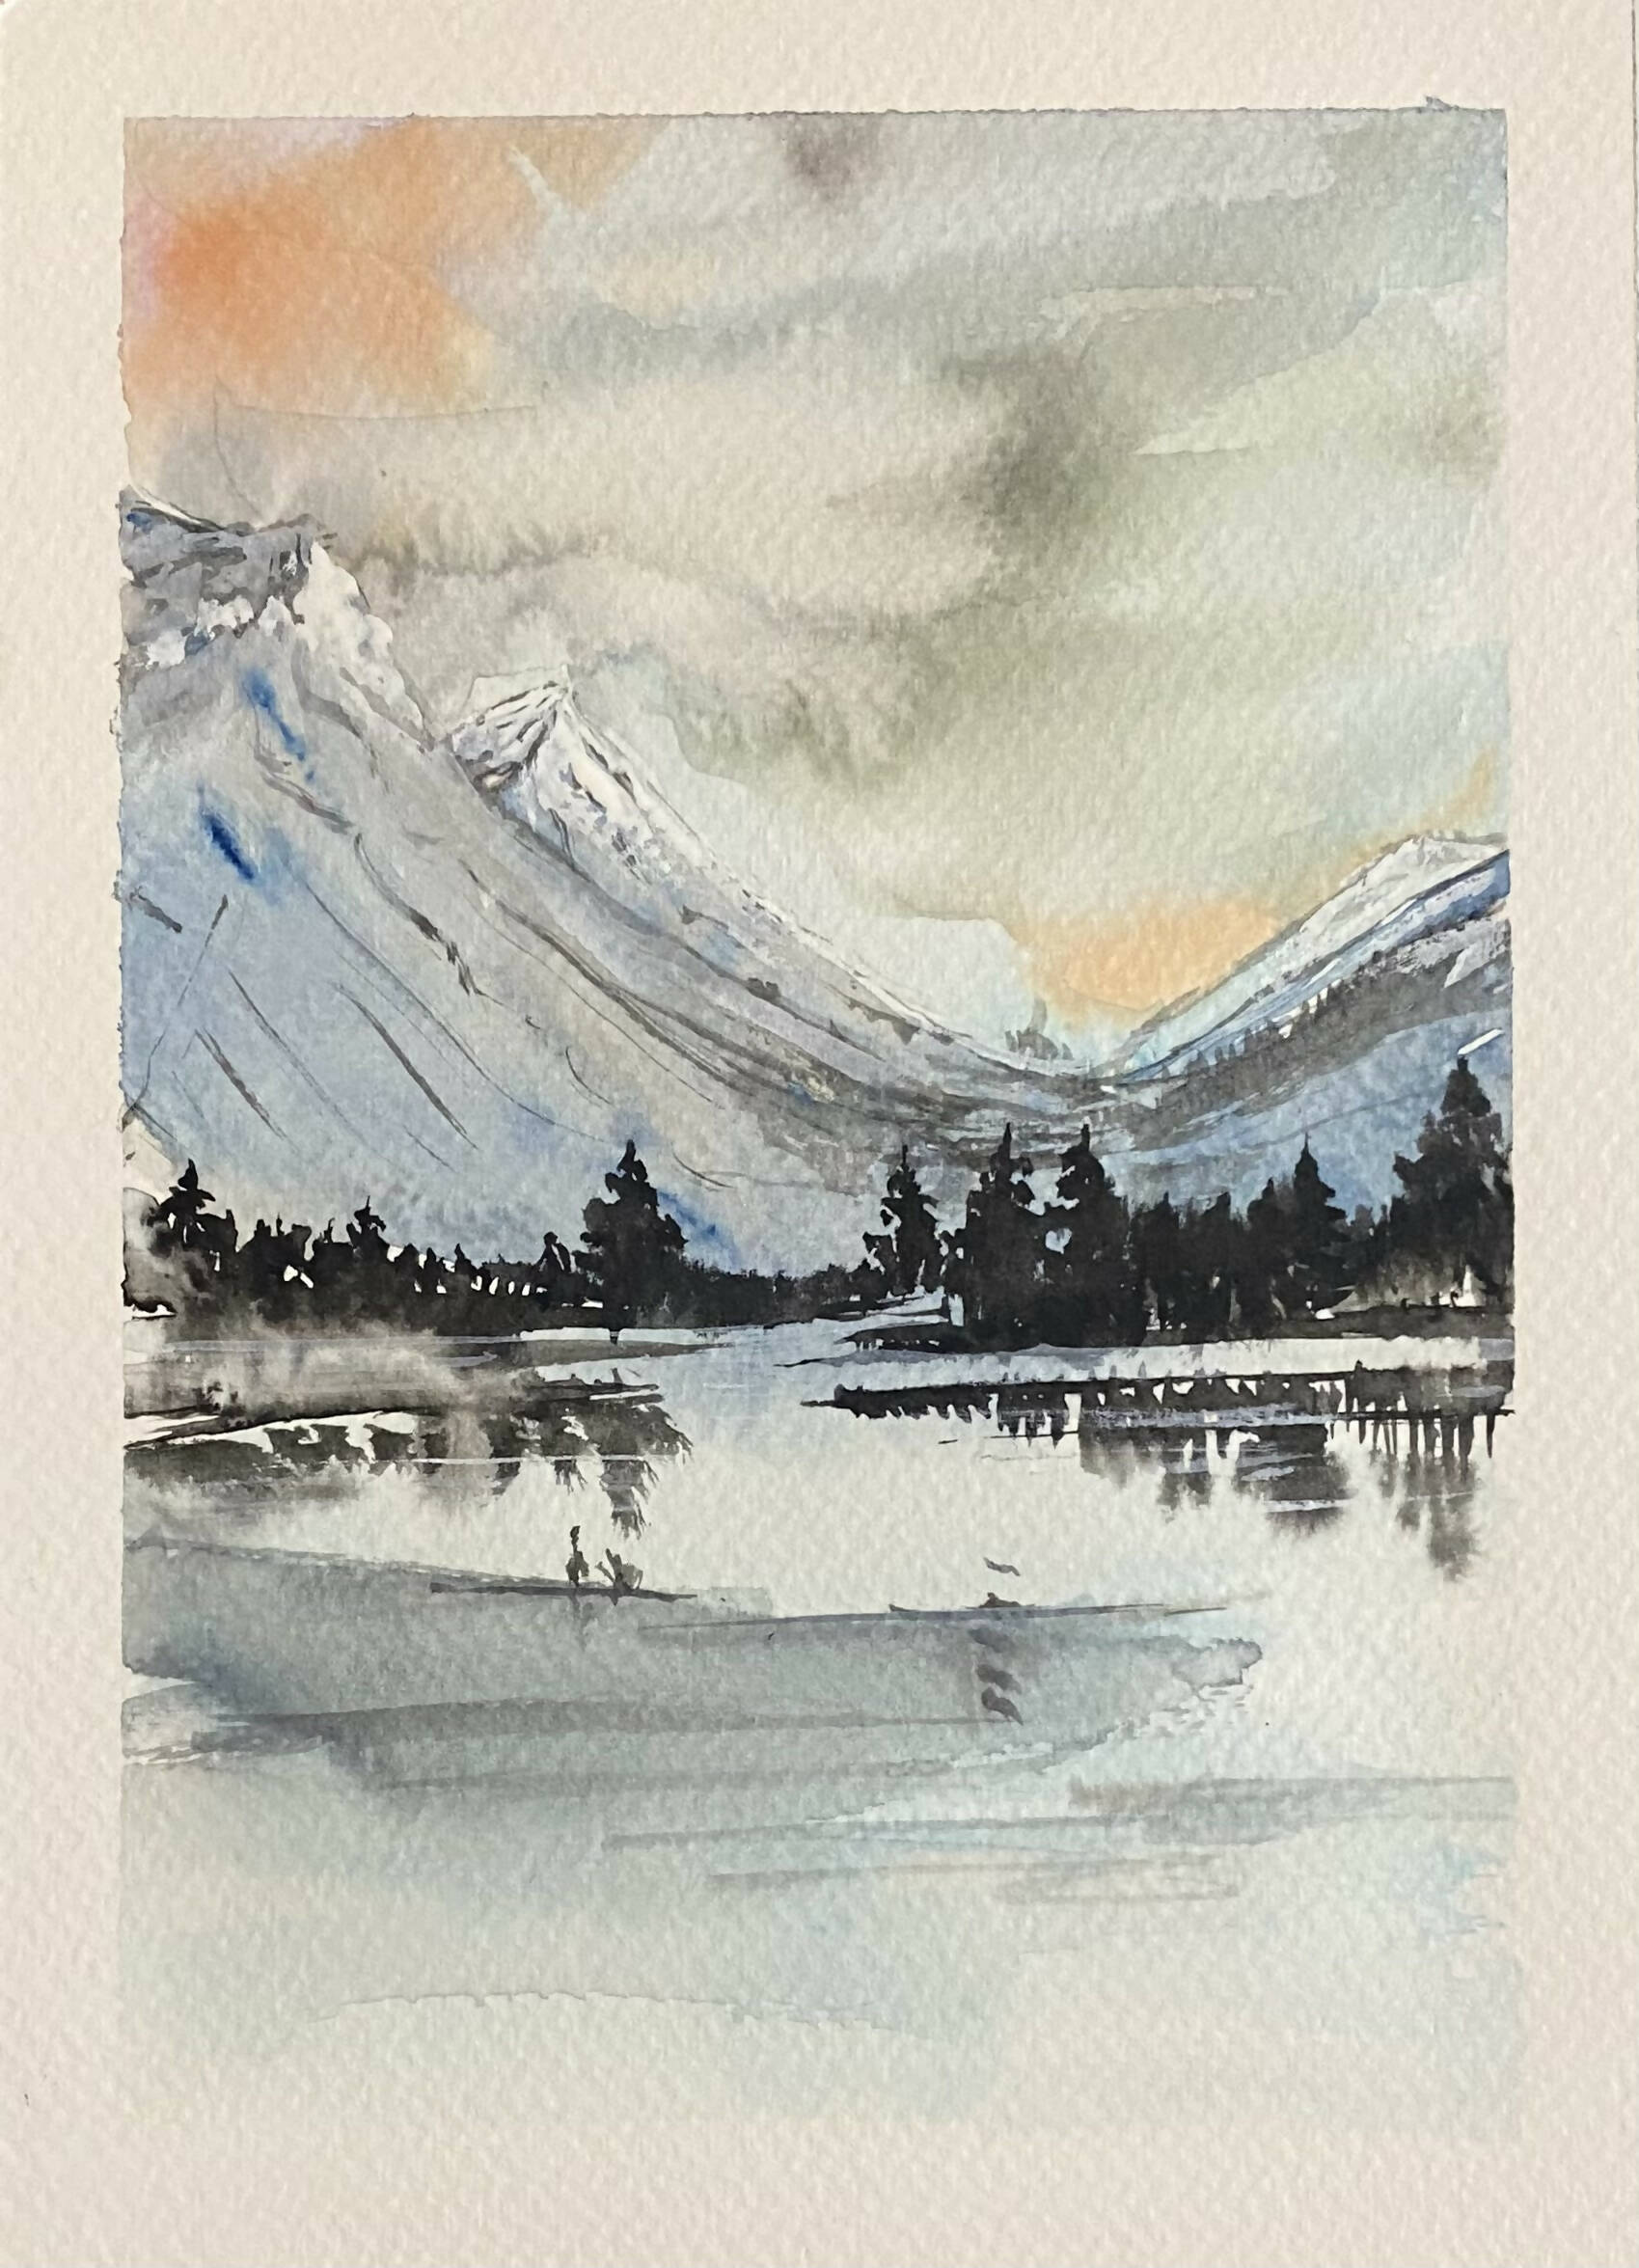 Healing landscape, the snowy mountains